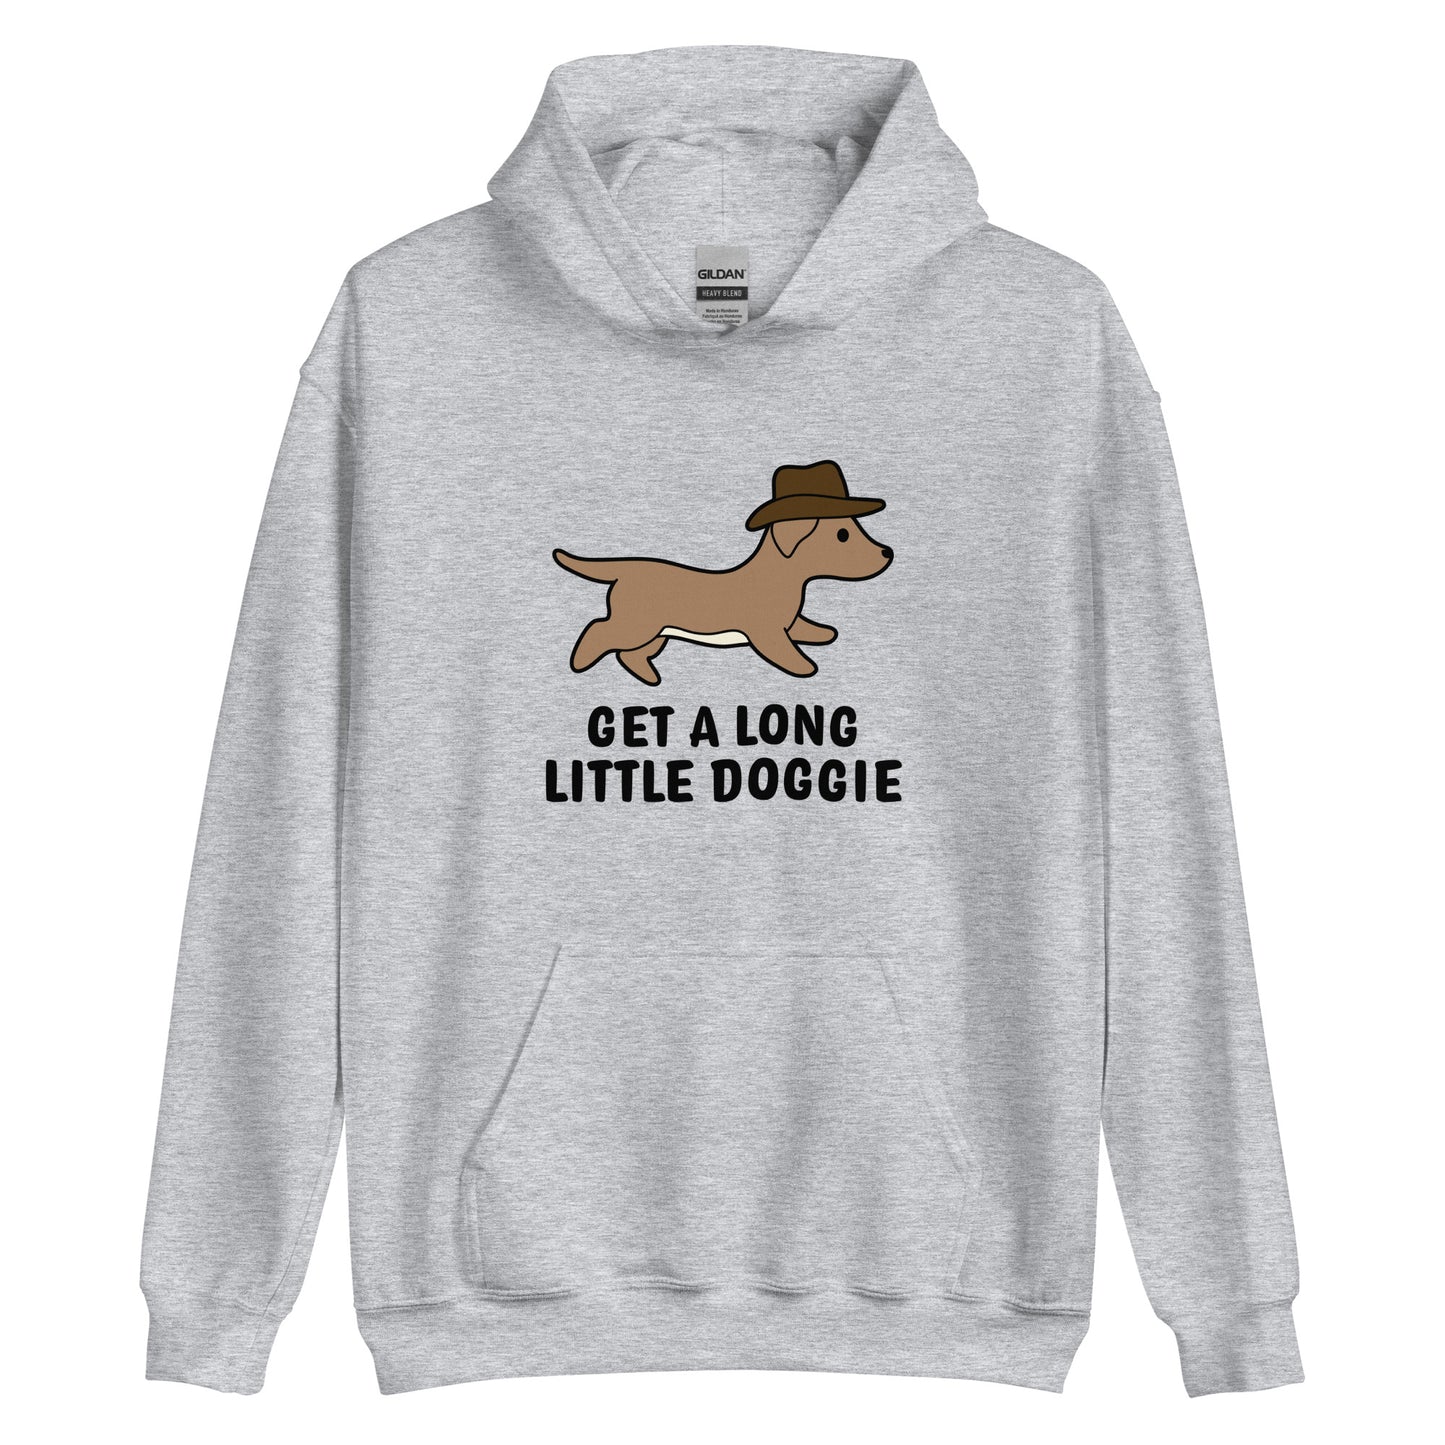 A grey hooded sweatshirt featuring an image of a dachshund wearing a cowboy hat. Text below the dog reads "Get a long little doggie"